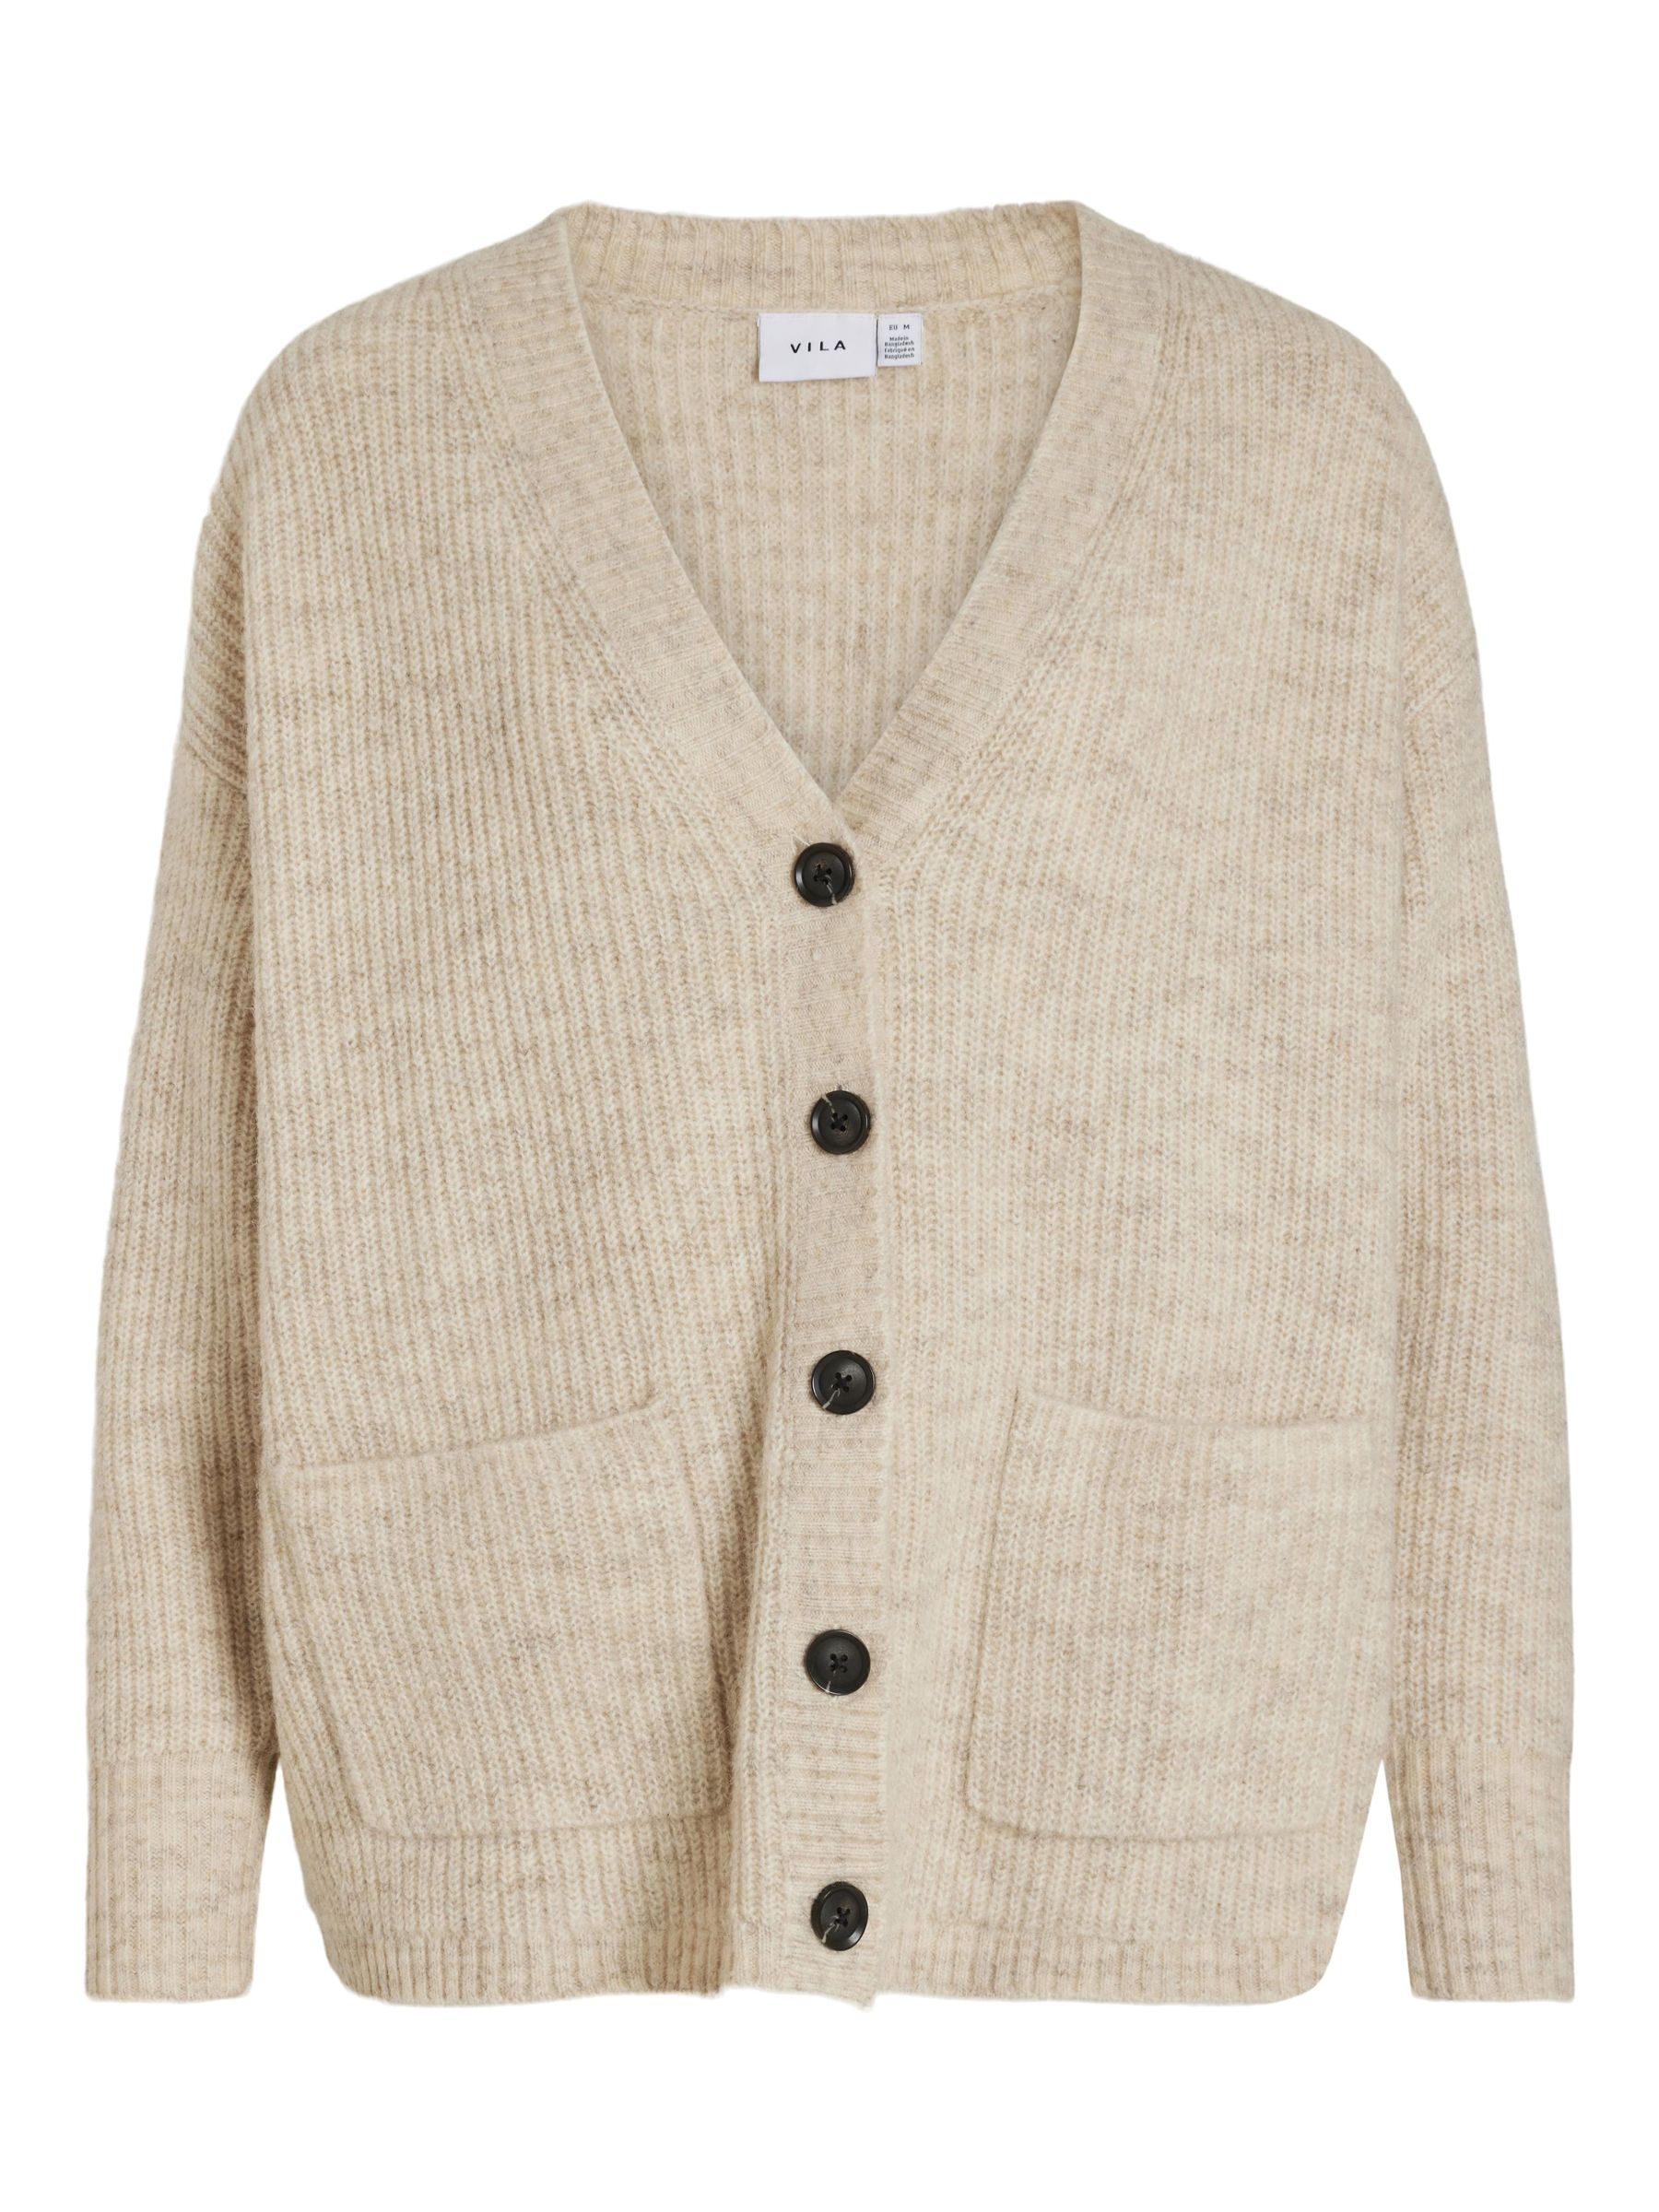 BUTTONED KNITTED CARDIGAN | Beige | VILA®